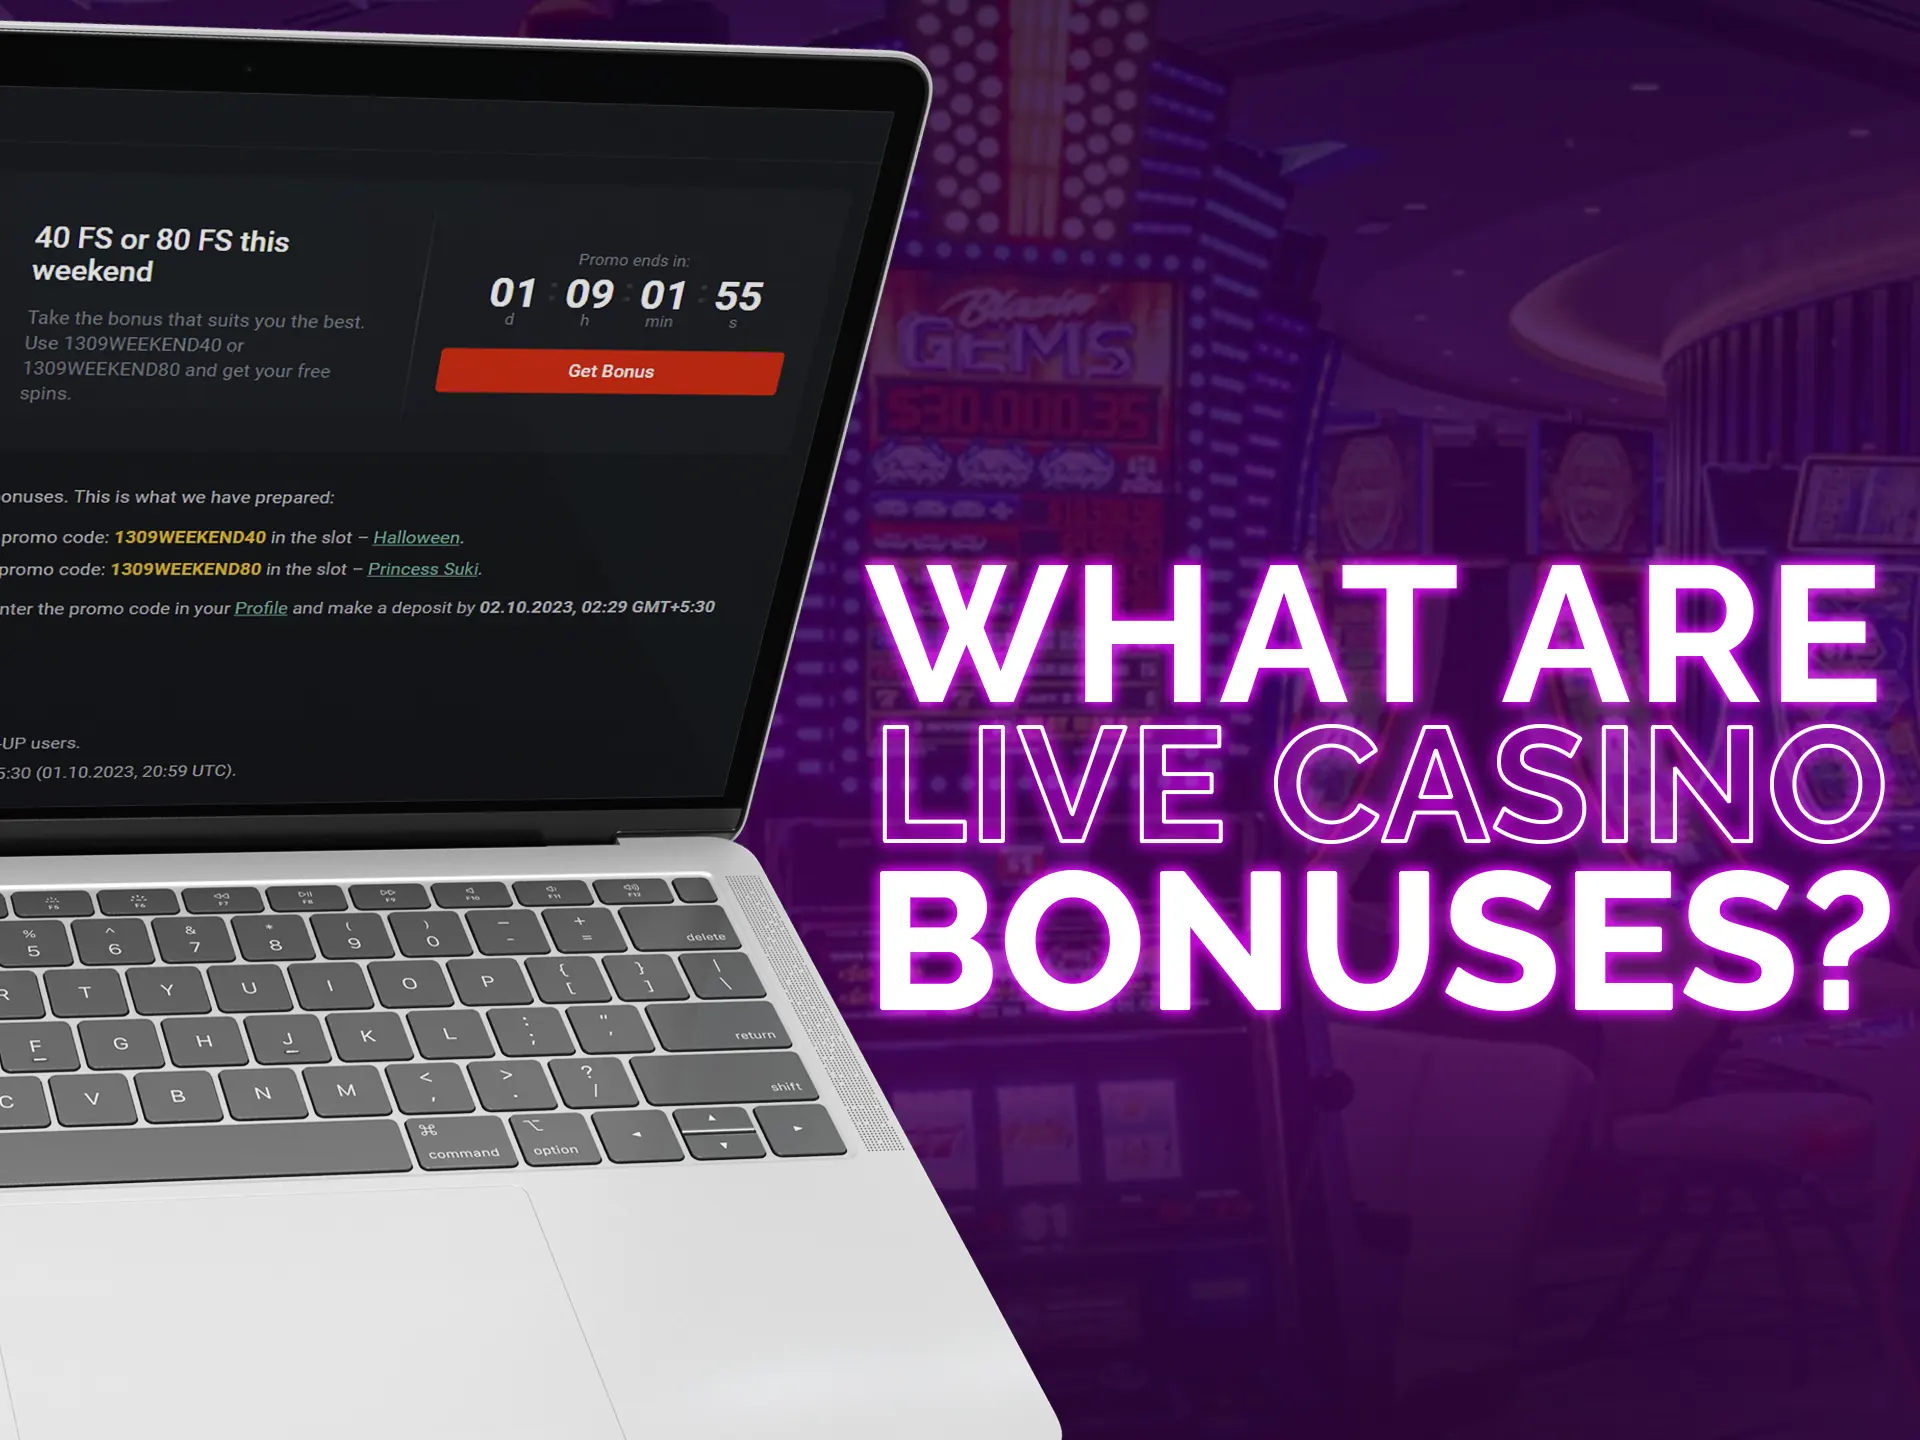 Learn what live casino bonuses are.